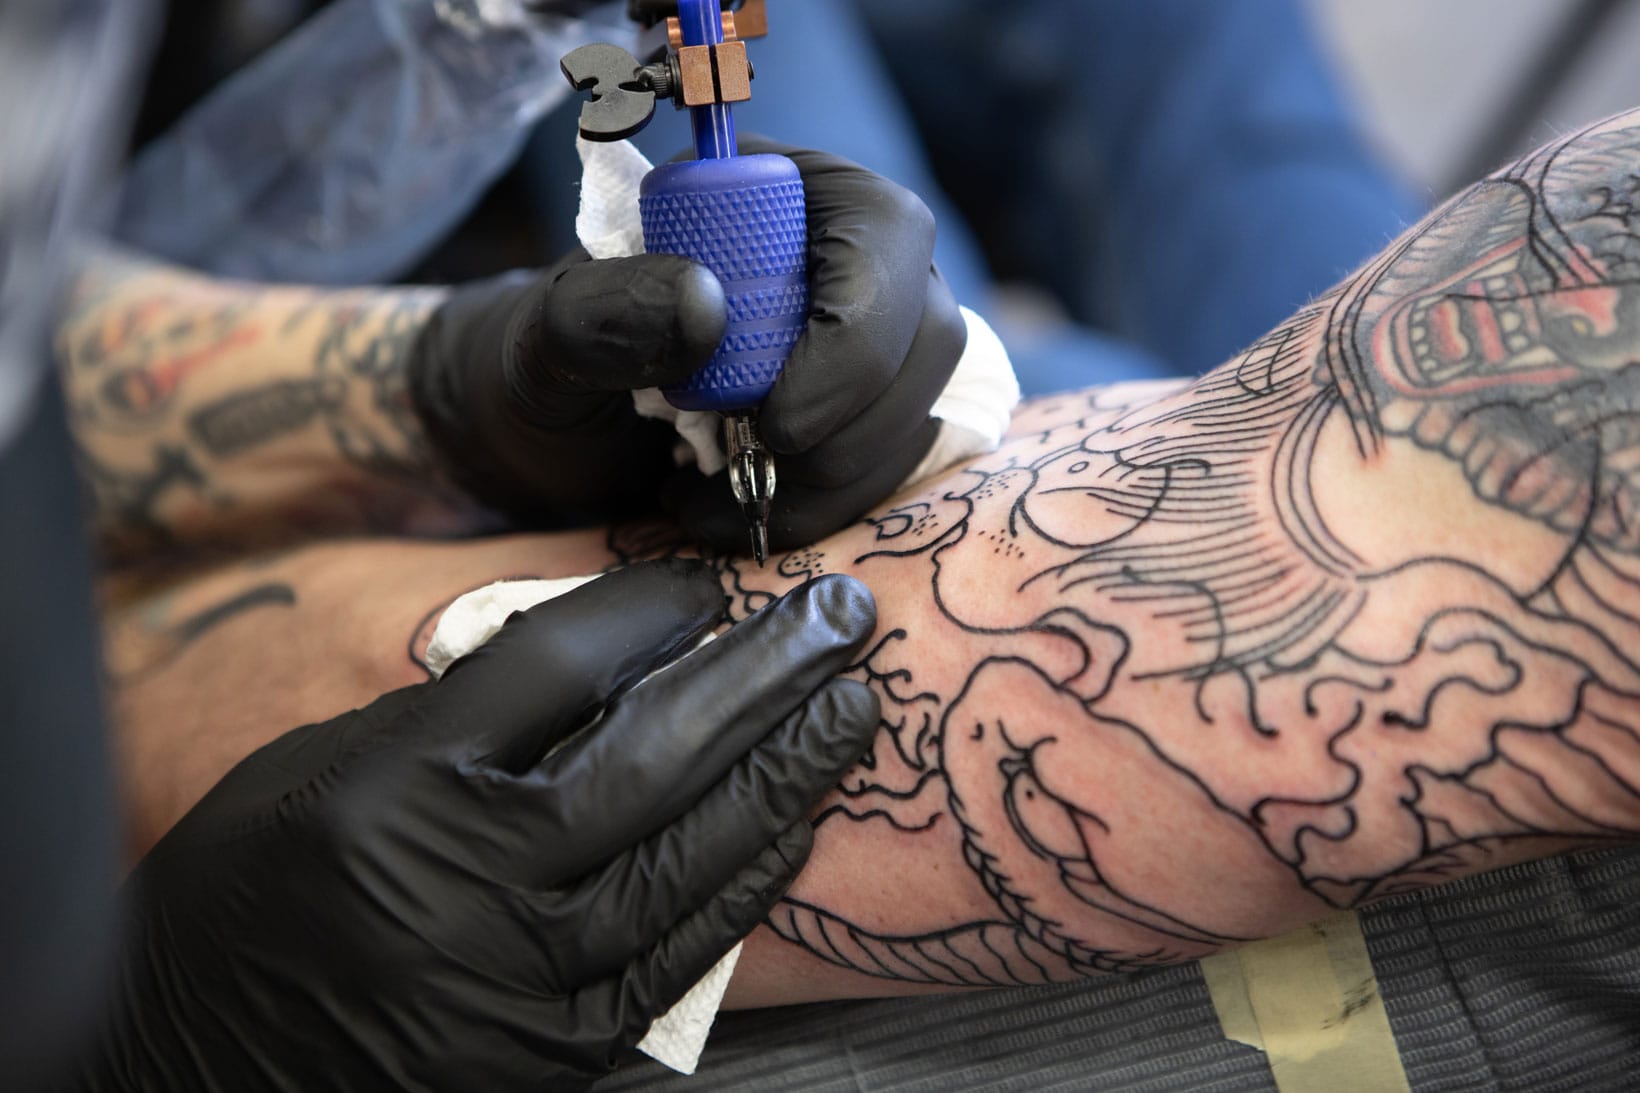 Medical tattooing is gratifying to artist Kerry Soraci  Currents Feature   Tucson Weekly